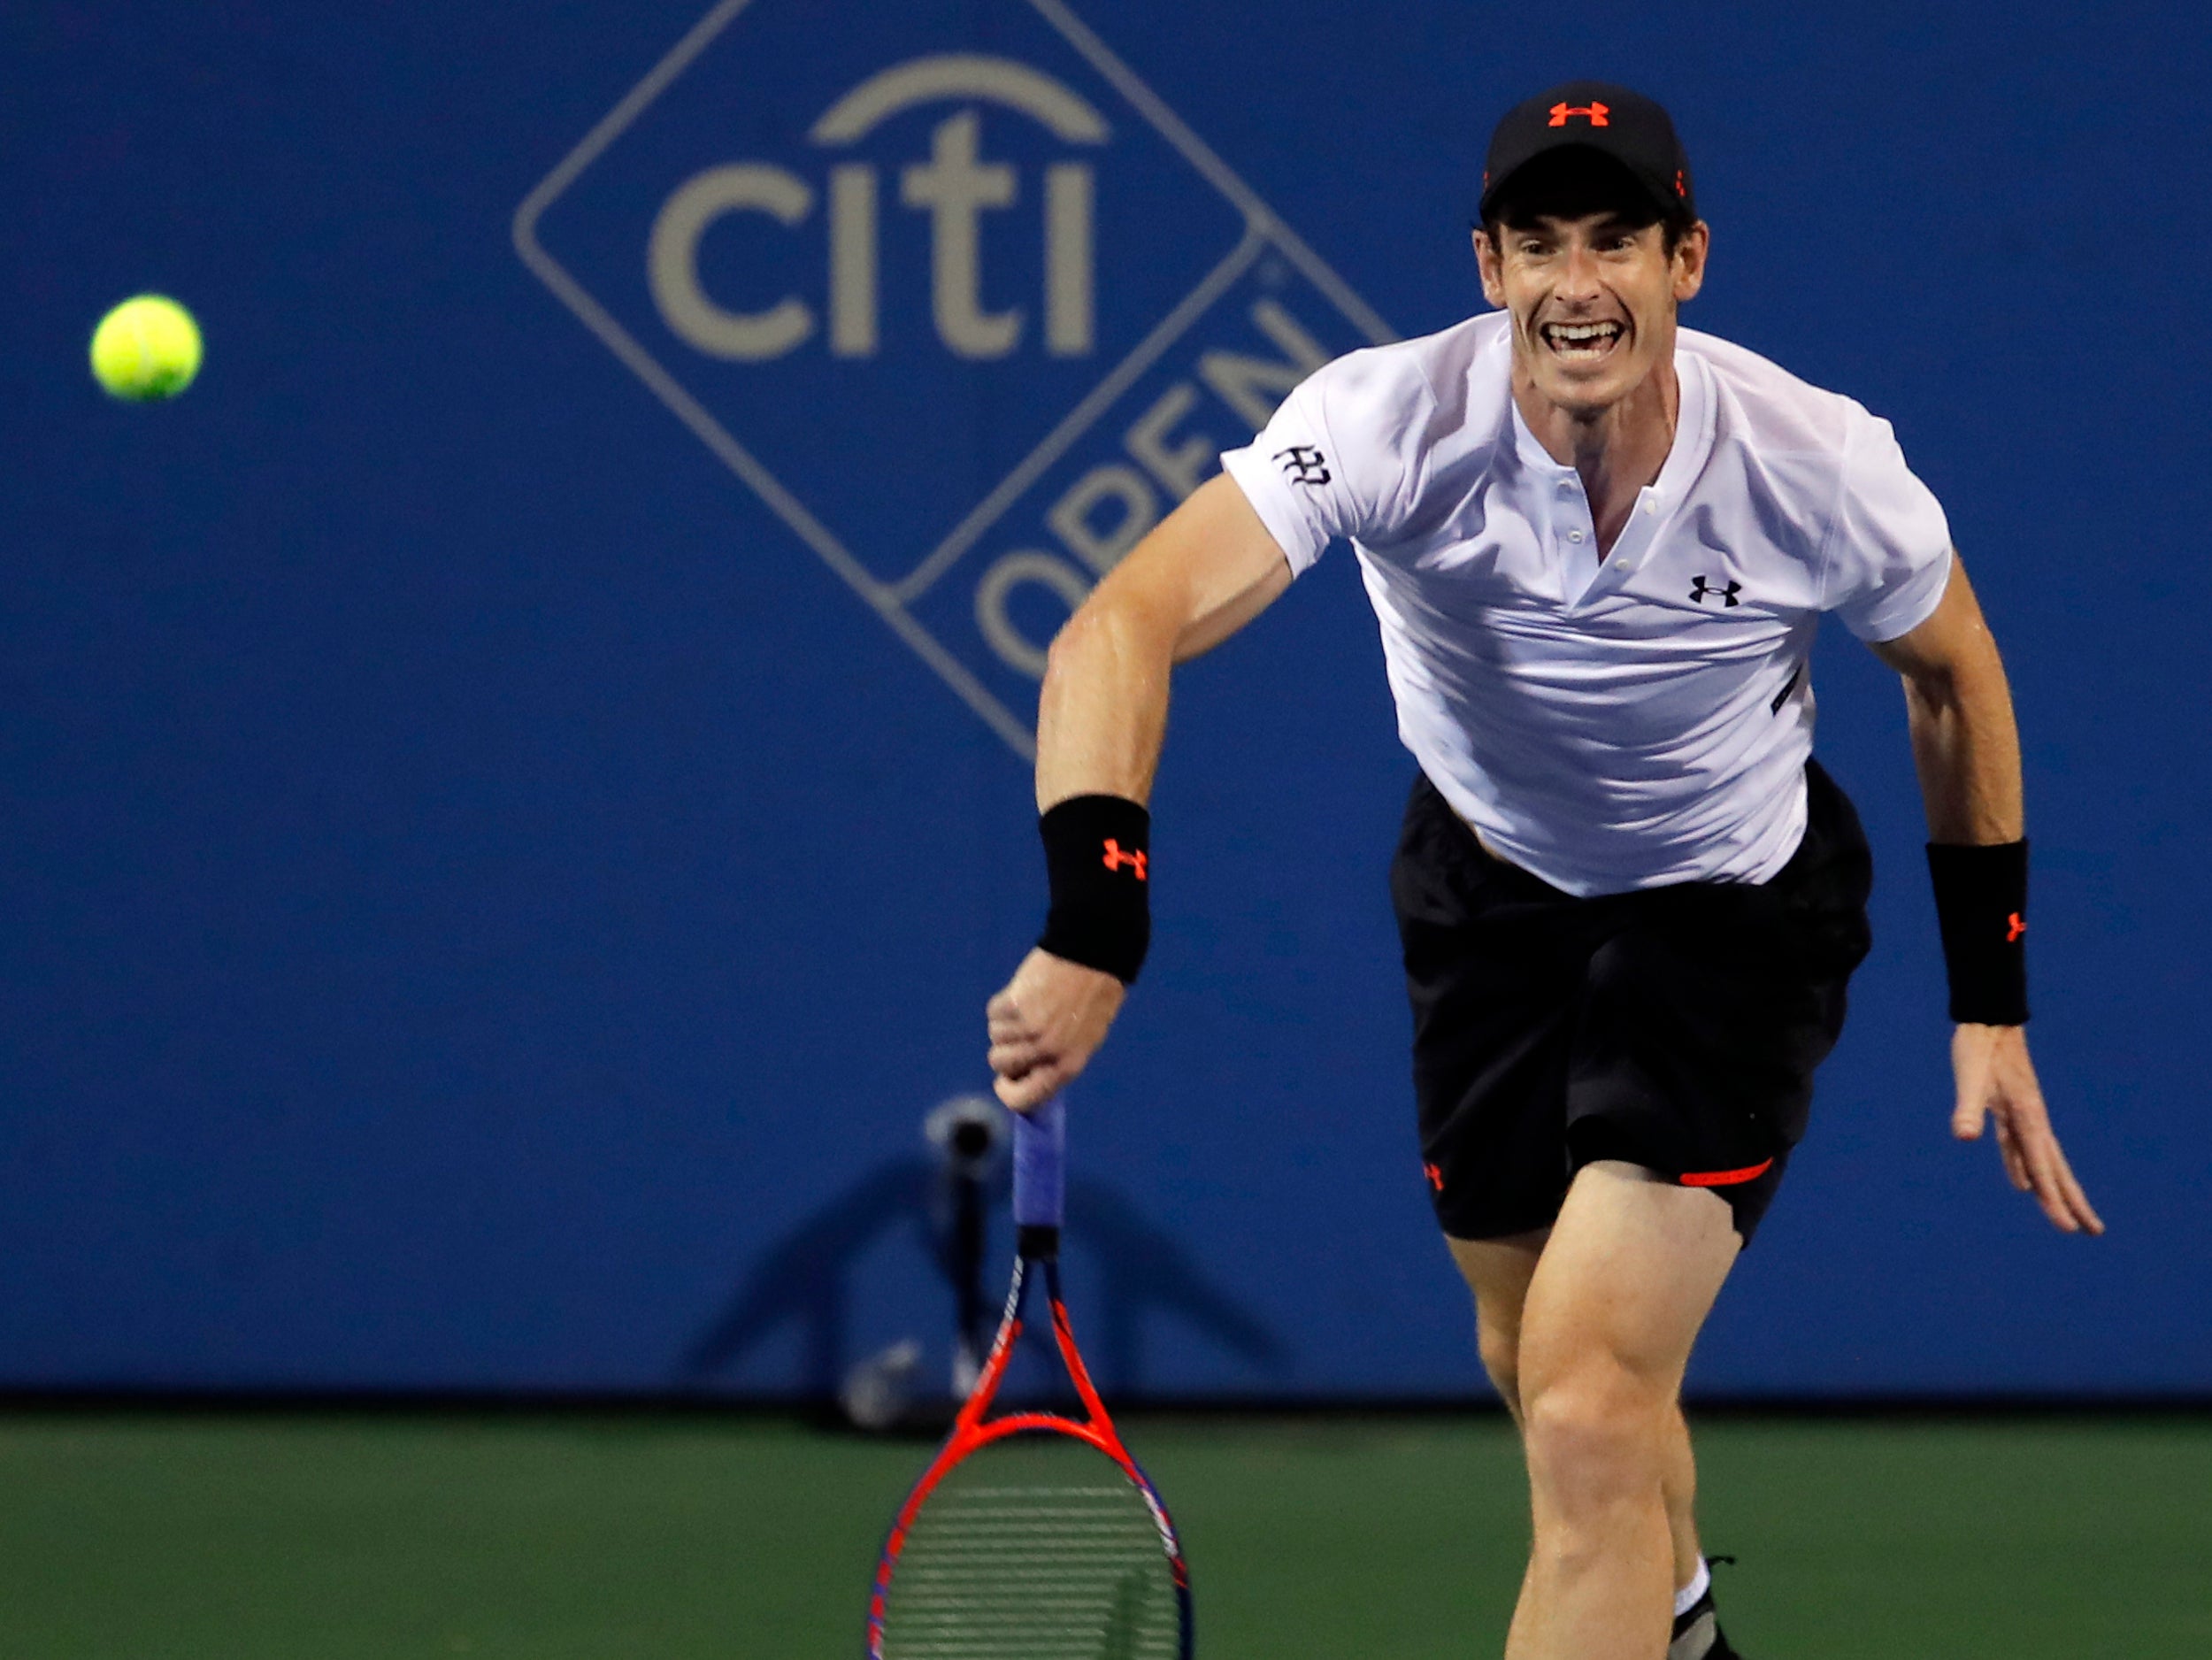 Murray has committed to play in China